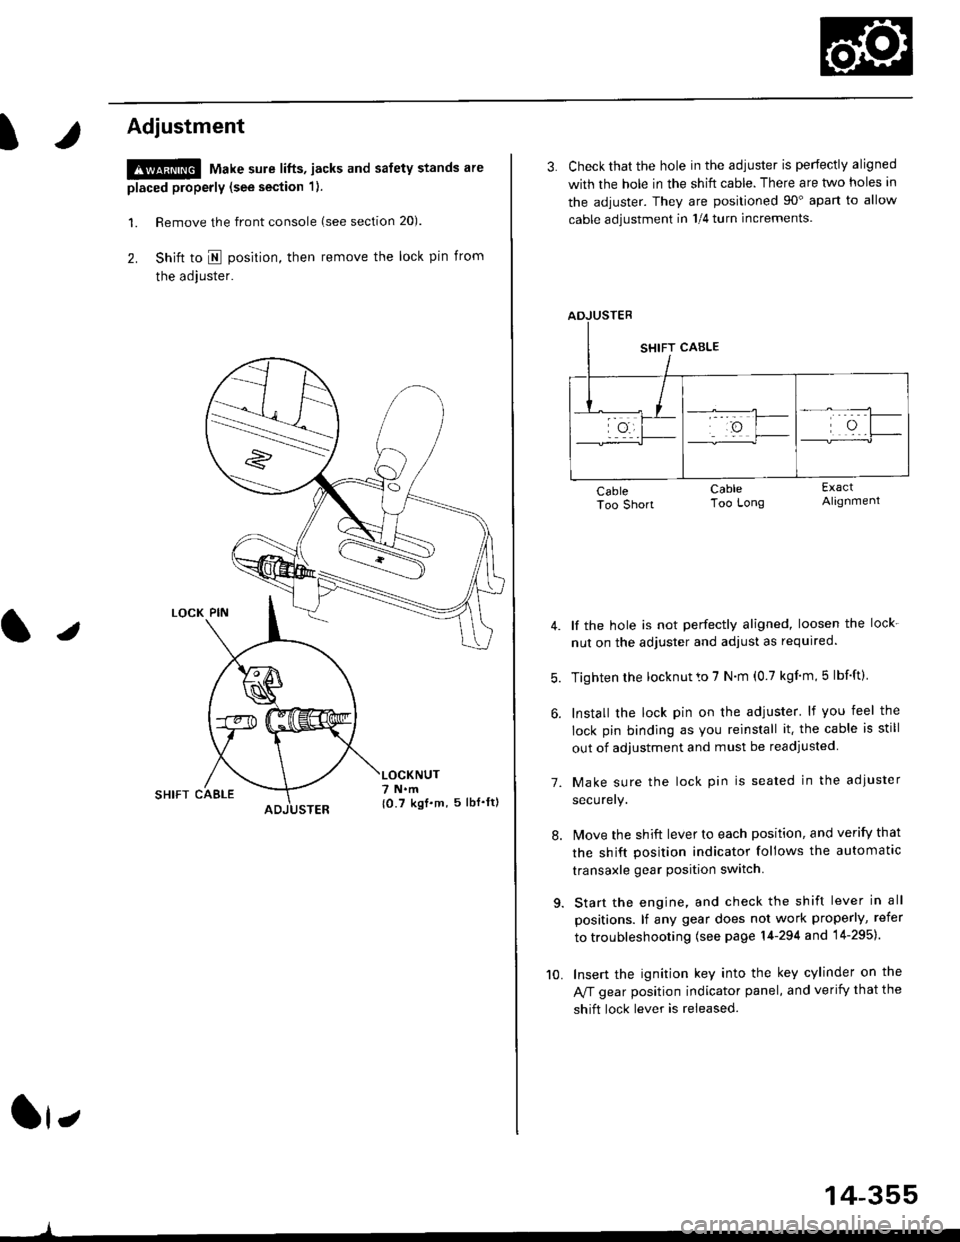 HONDA CIVIC 2000 6.G Workshop Manual t
Adjustment
!@ Make sure lifts, jacks and safety stands are
placed properly (see section 1).
l. Remove the front console (see section 20).
2. Shift to I posirion, then remove the lock pin from
the ad